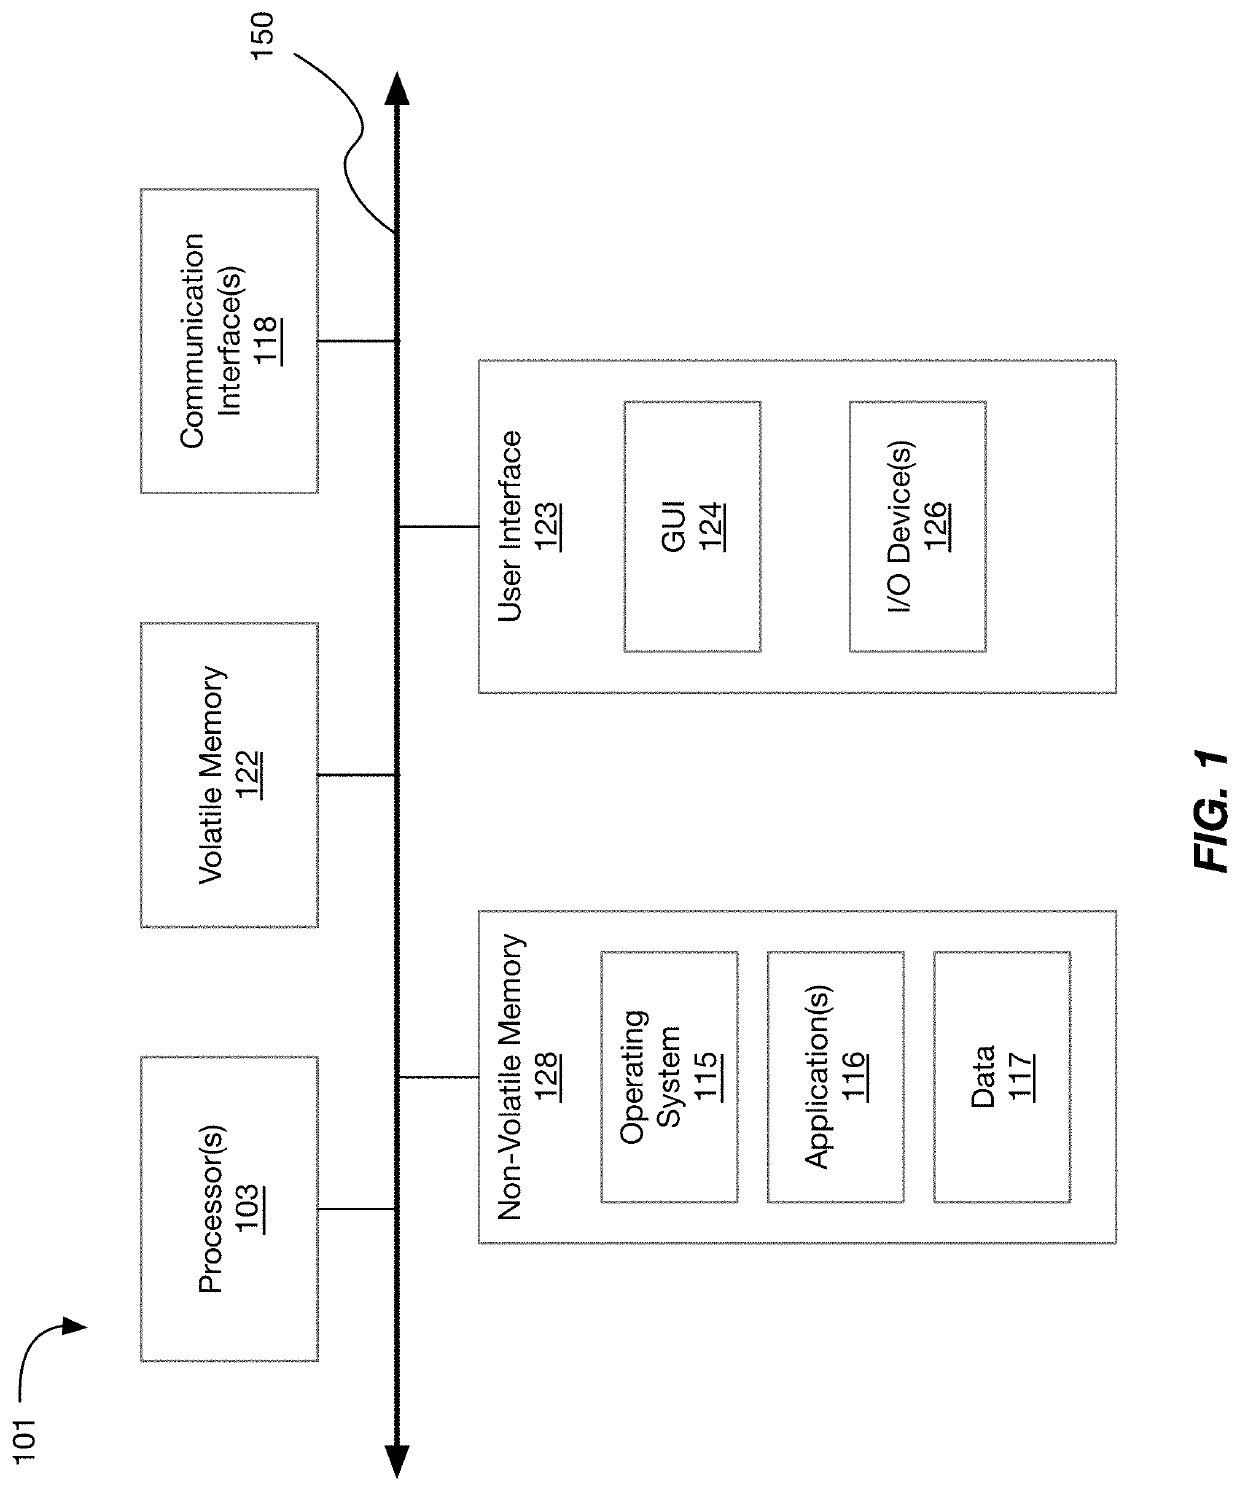 Systems and methods for intelligent application instantiation